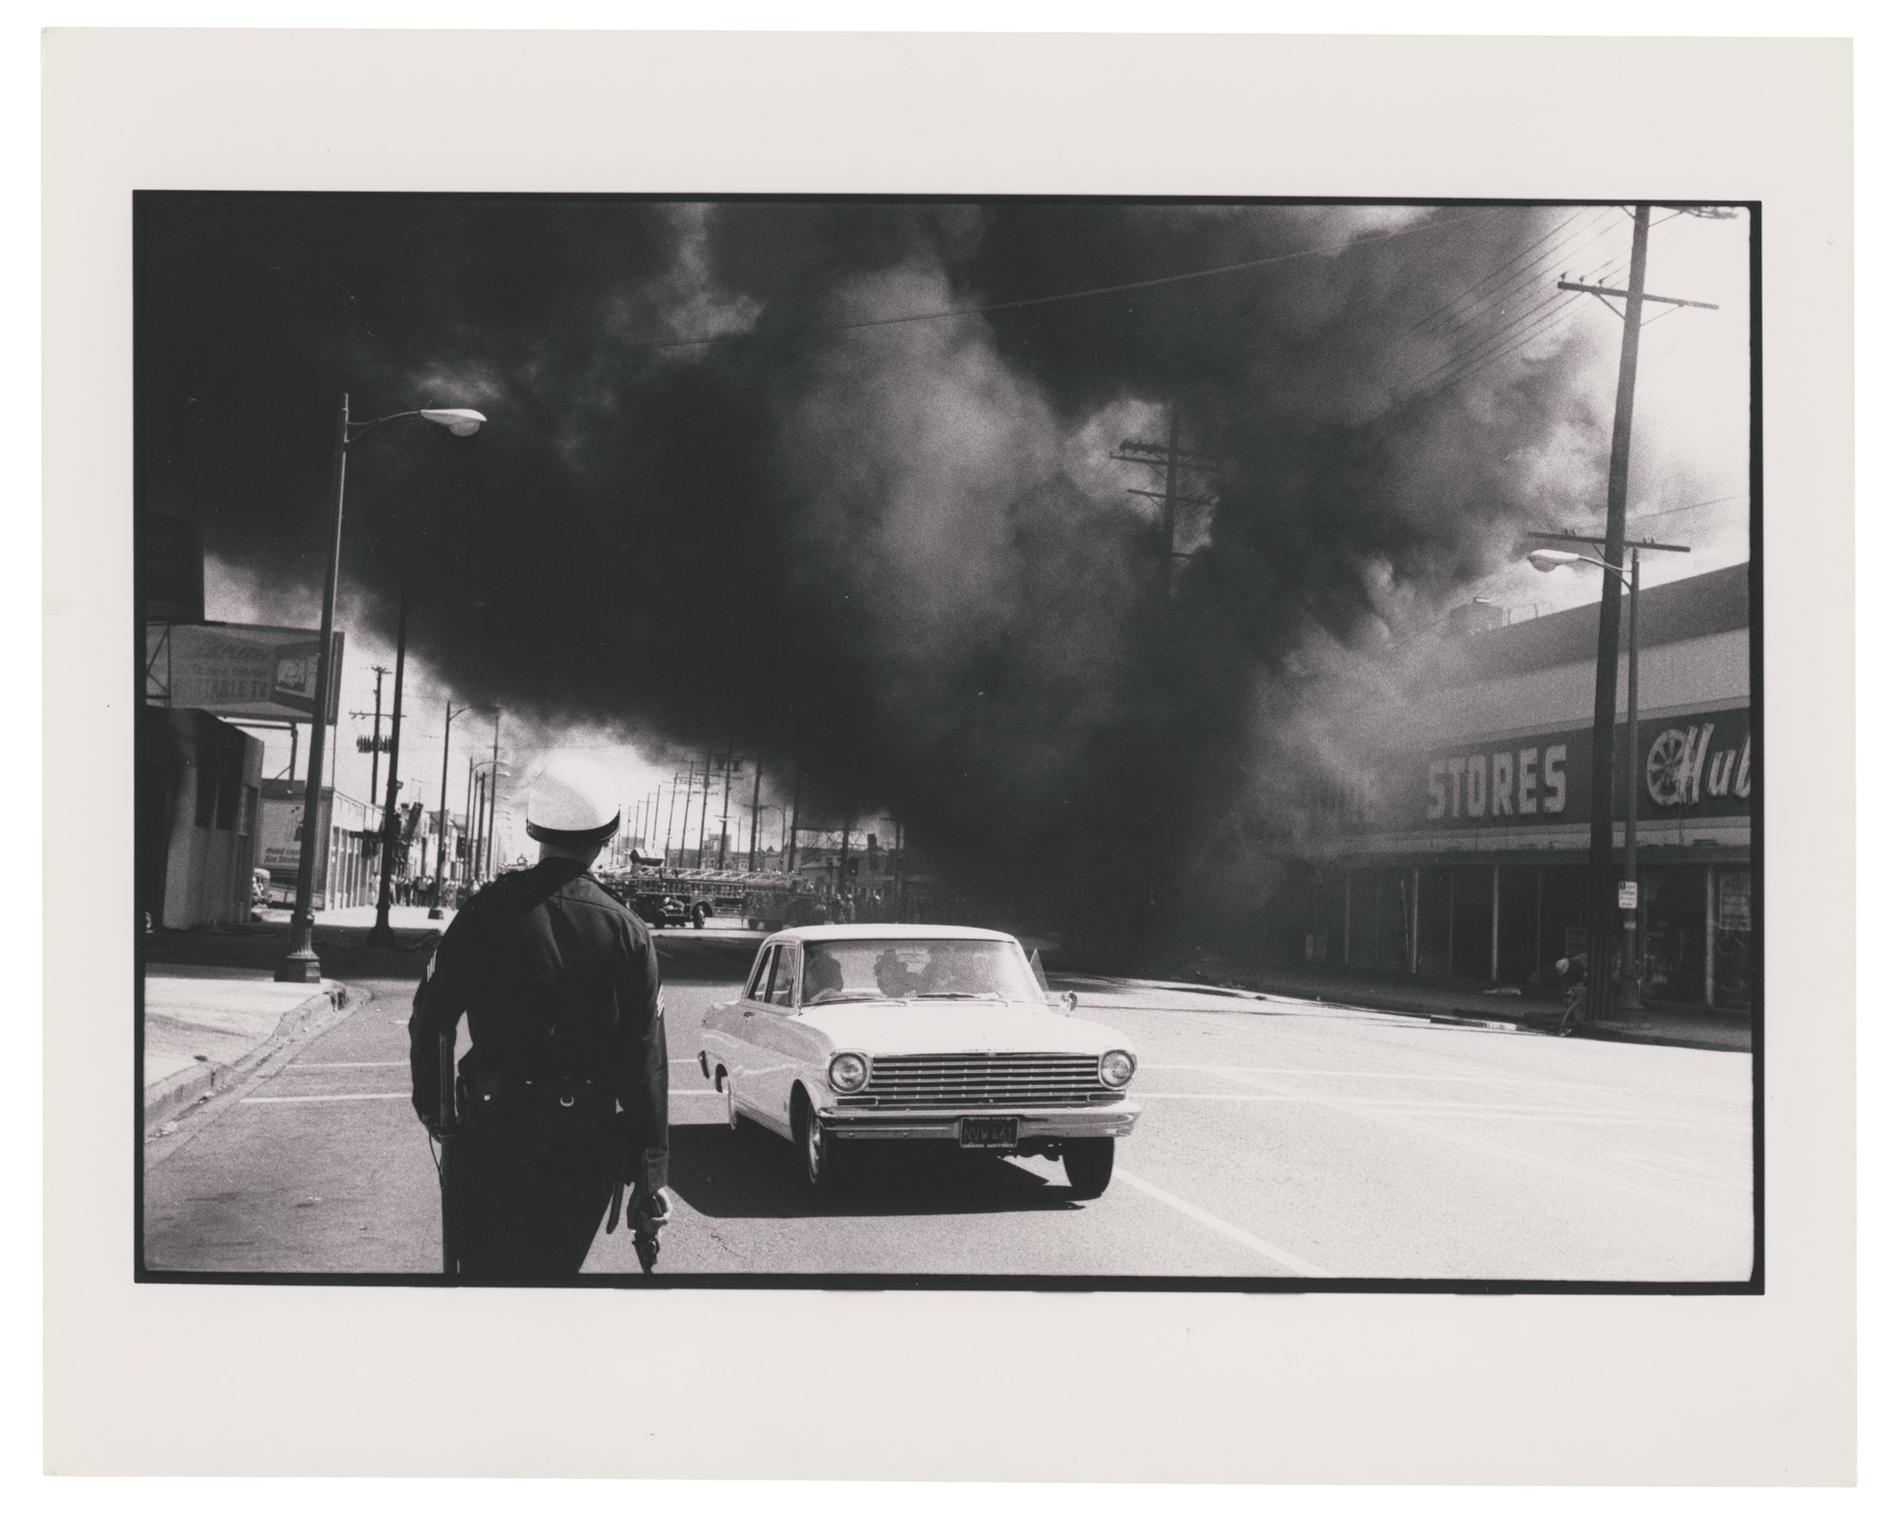 On a street, a plume of smoke comes out of a storefront. A helmeted police officer walks towards it with a gun, back to the camera, while a car drives away from it.